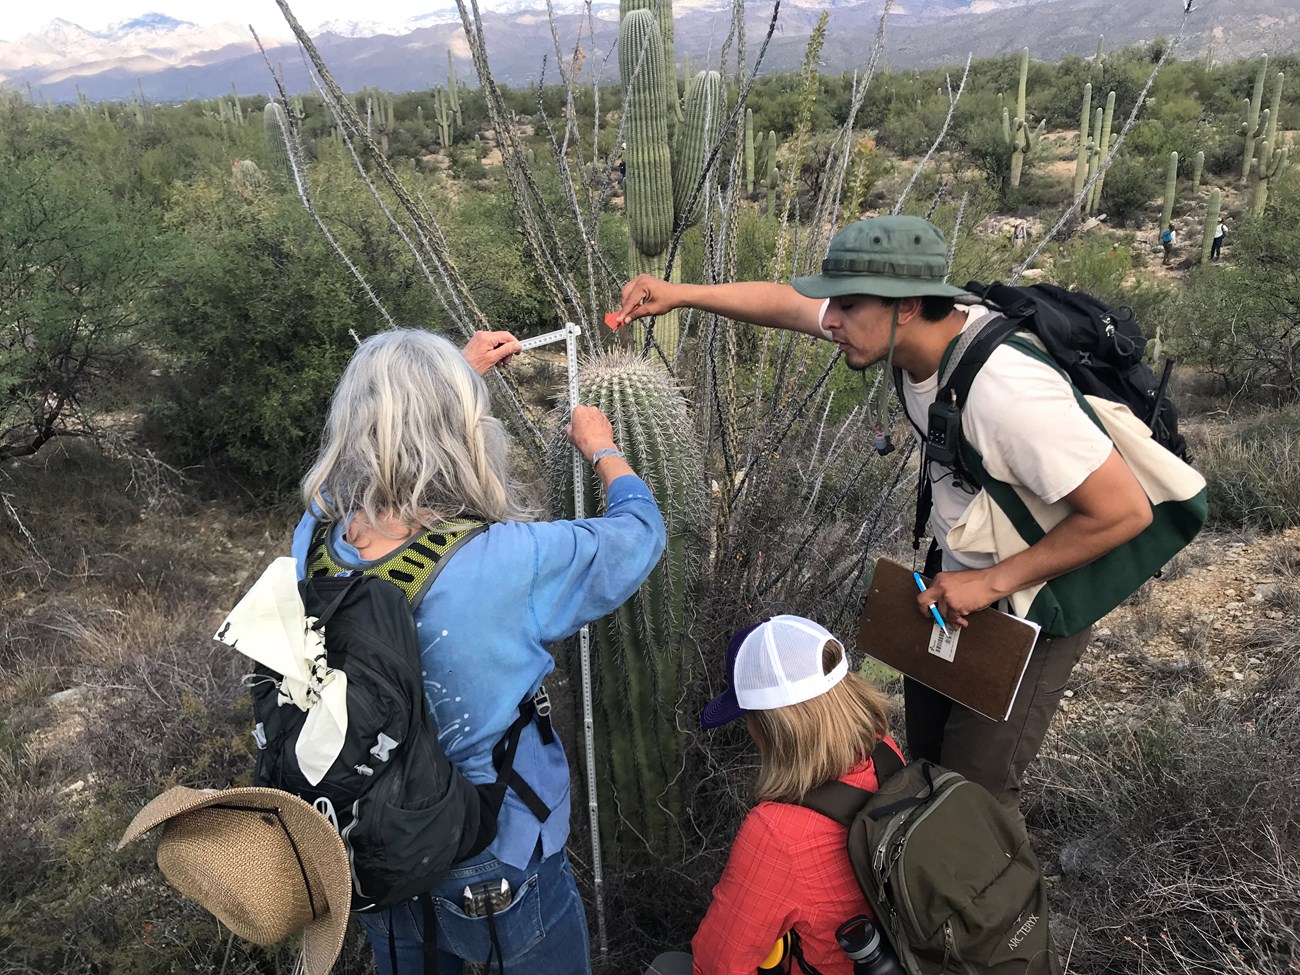 People working together to find the height of a saguaro. A woman is finding the height of a saguaro using a meter stick. A man is putting a flag through the spines of a saguaro. Another woman is squatting down facing the saguaro.